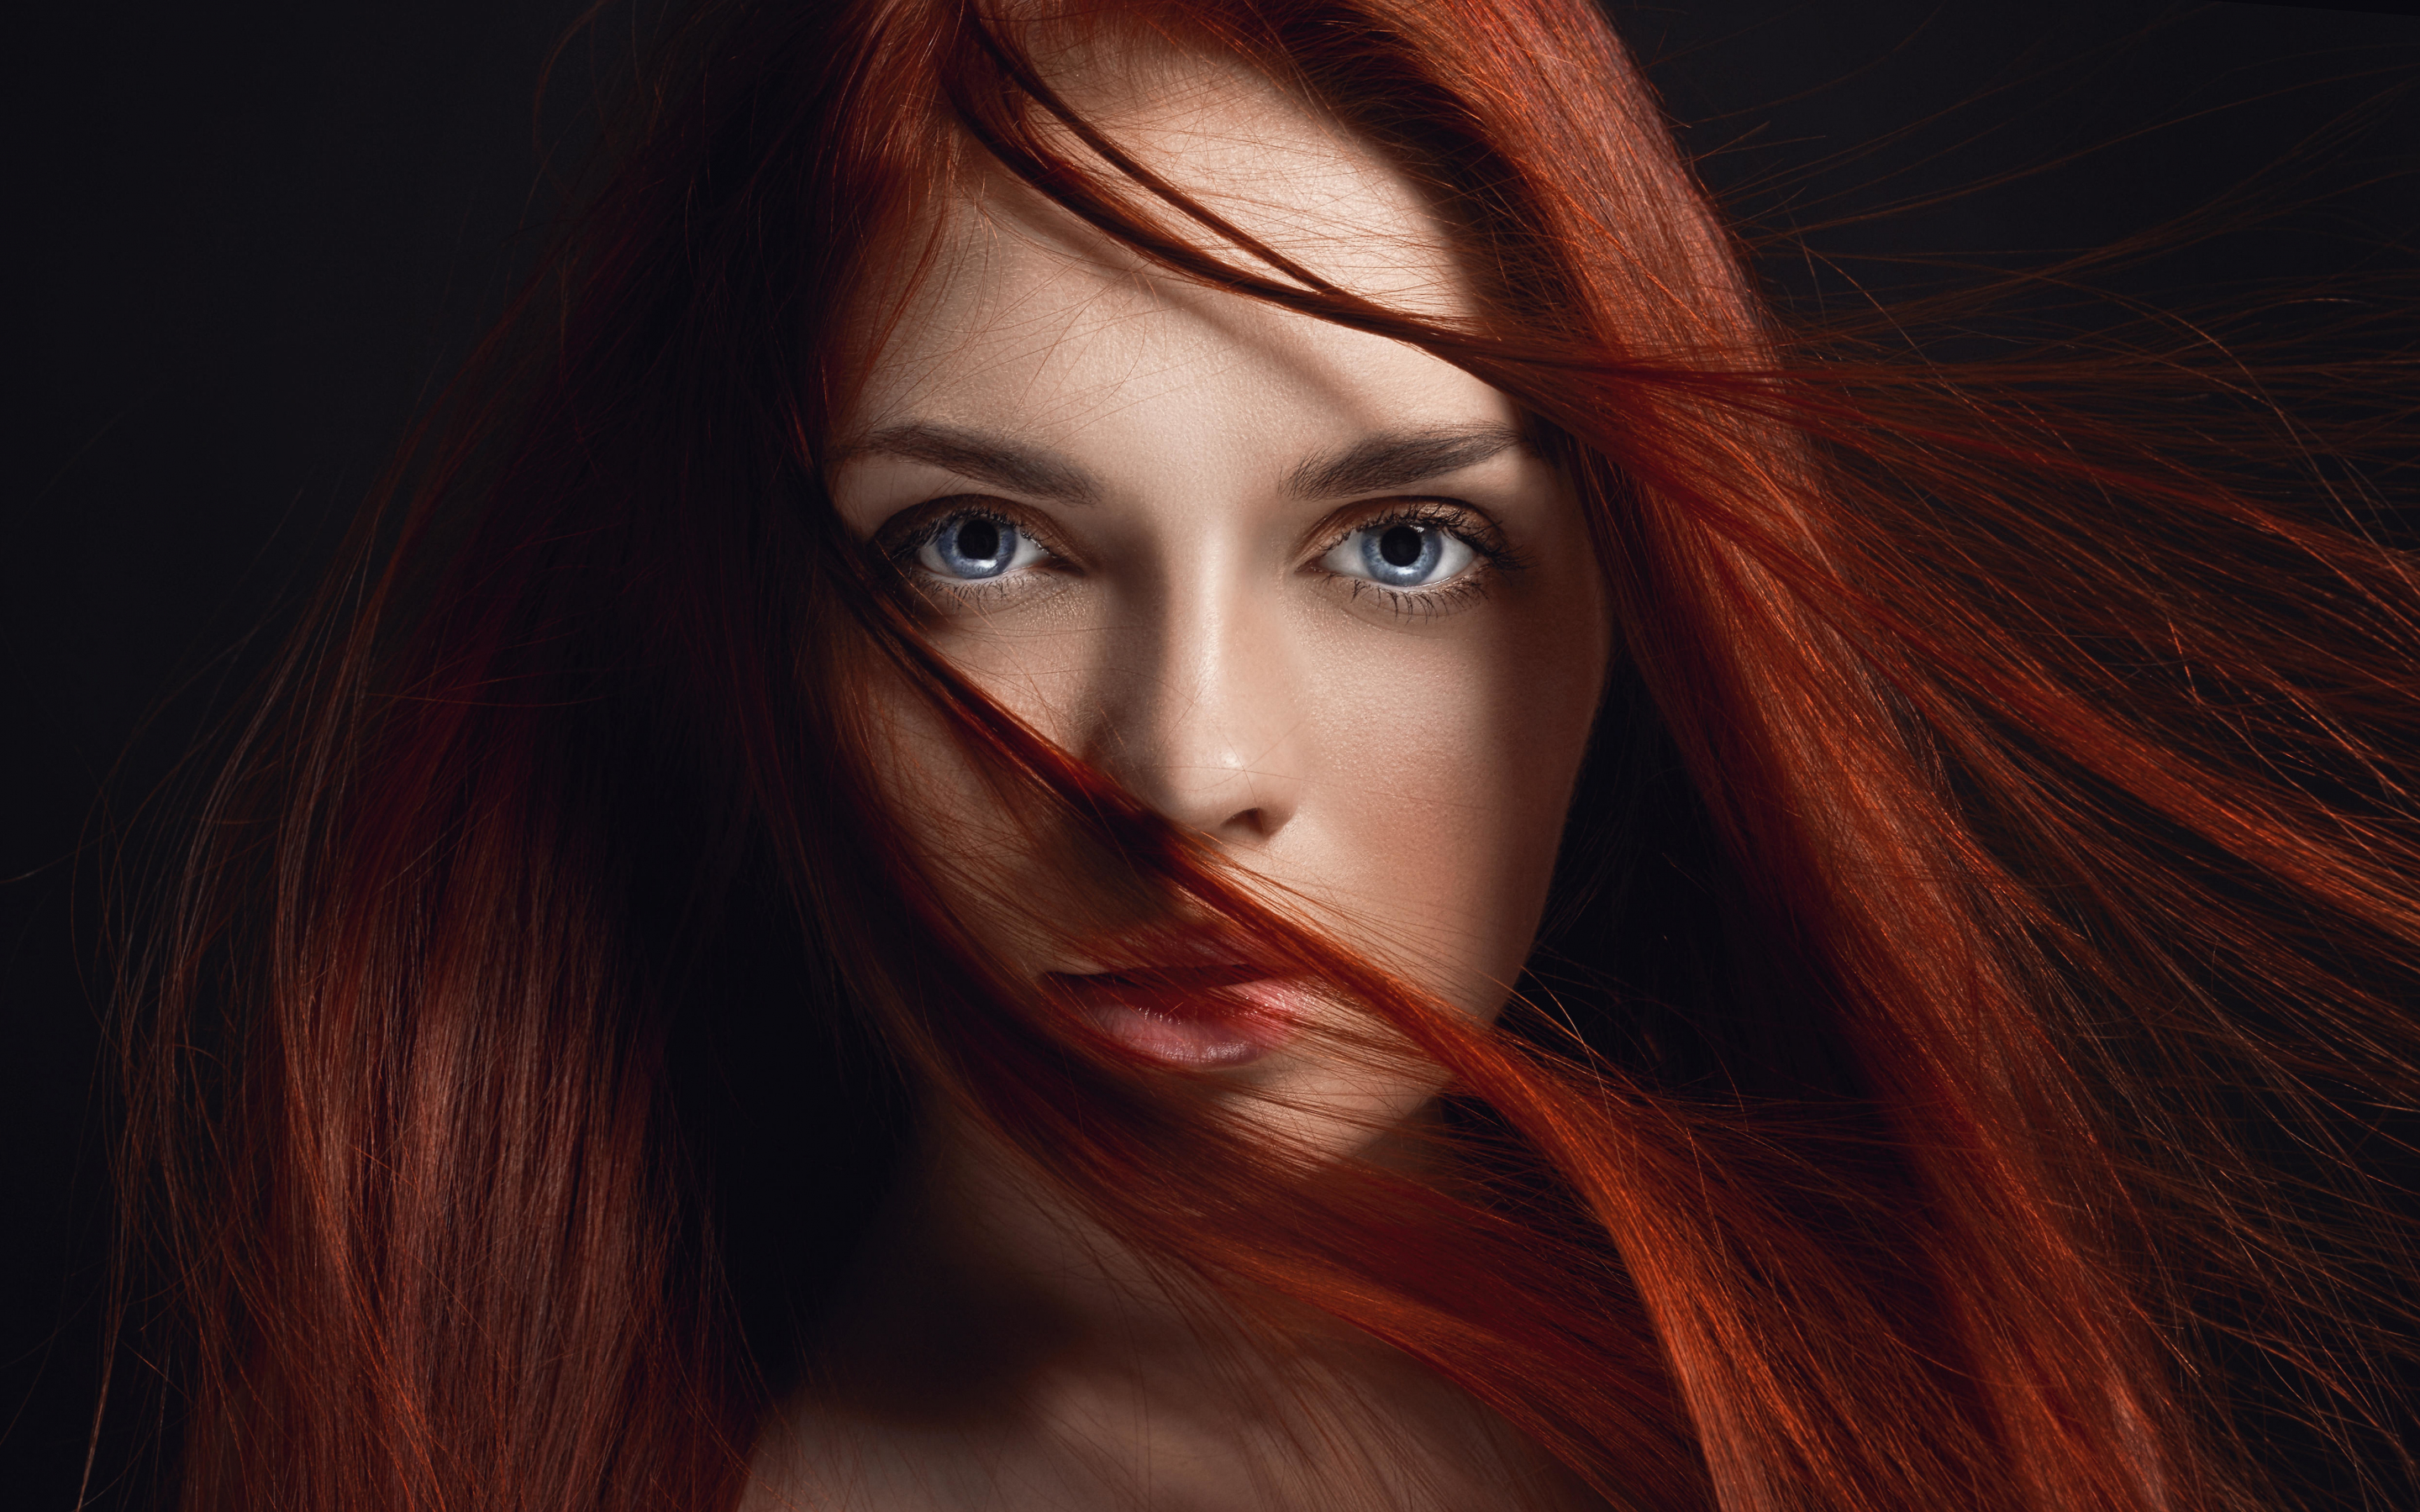 Redhead, girl, hairs on face, 2880x1800 wallpaper